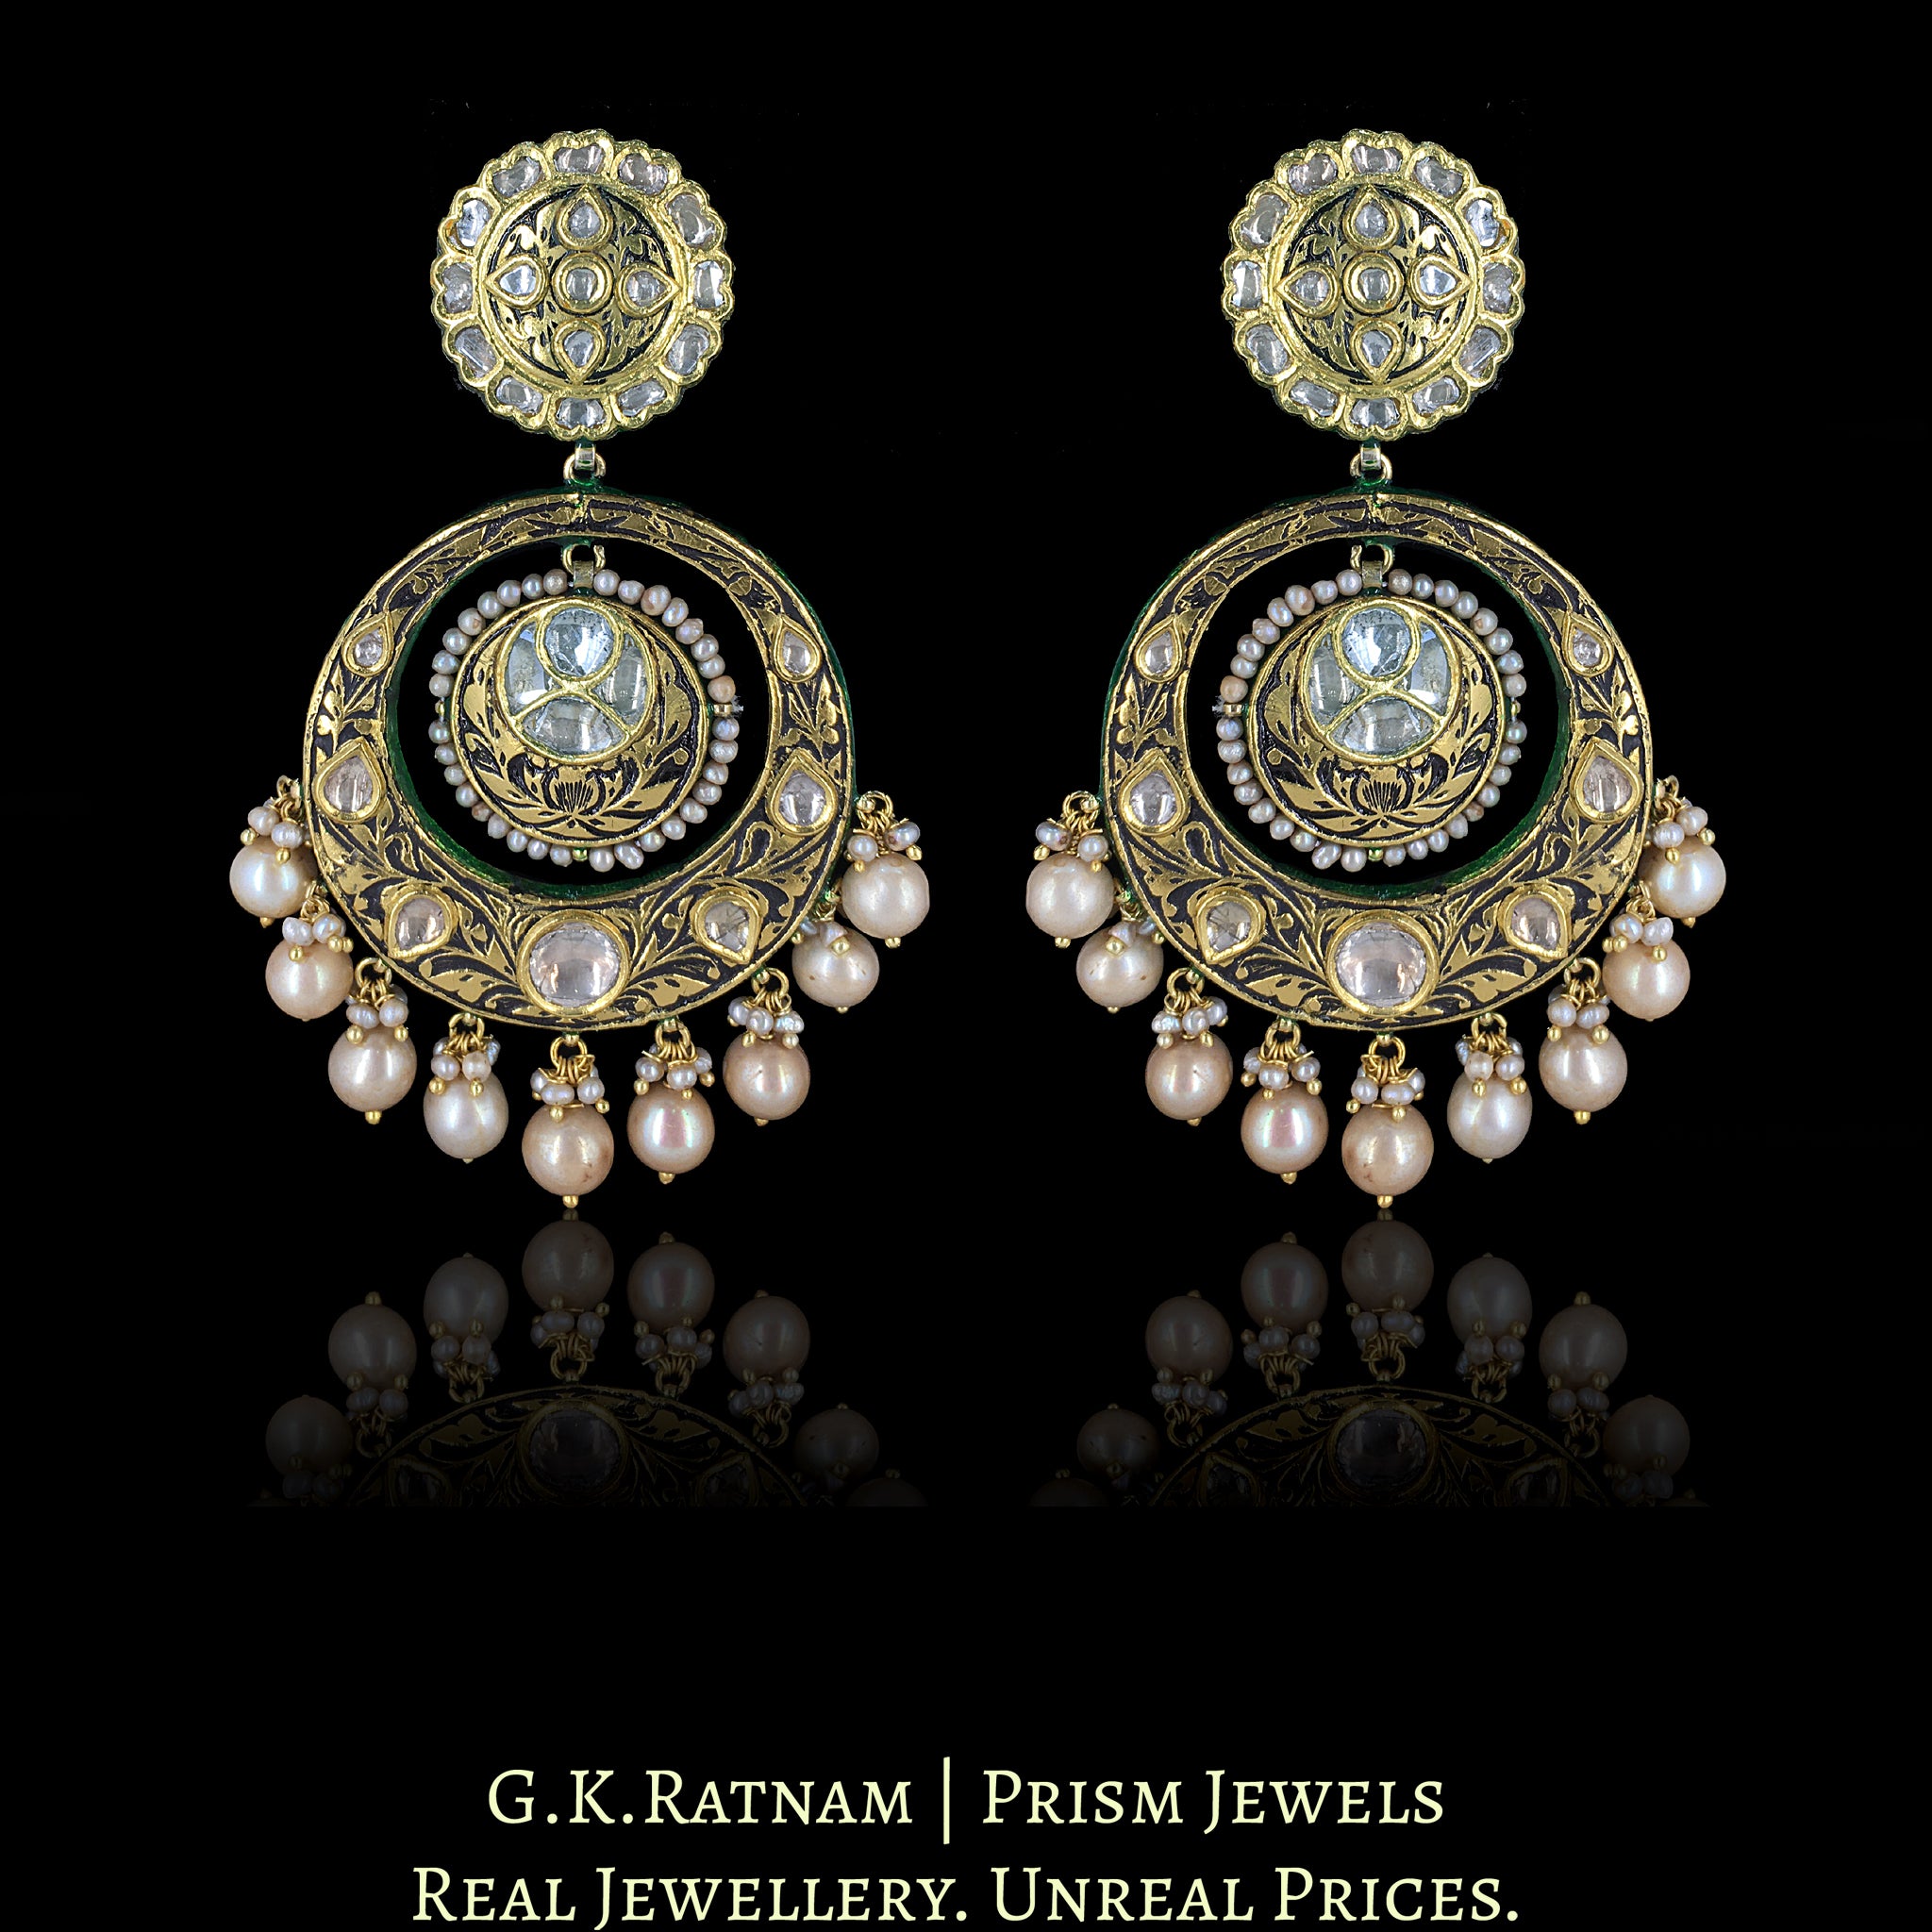 23k Gold and Diamond Polki antique-finish Chand Bali Earring Pair